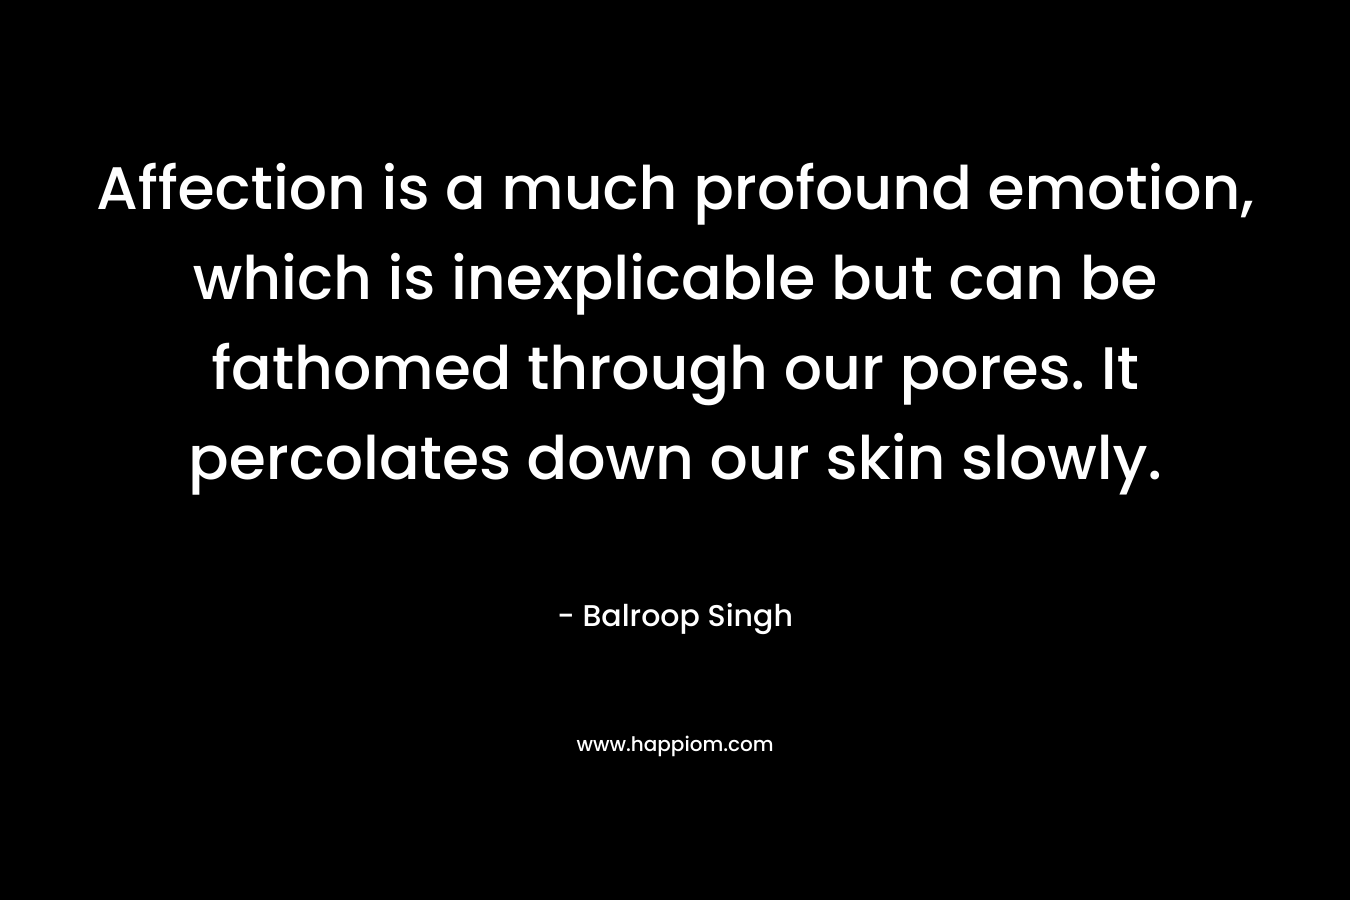 Affection is a much profound emotion, which is inexplicable but can be fathomed through our pores. It percolates down our skin slowly.